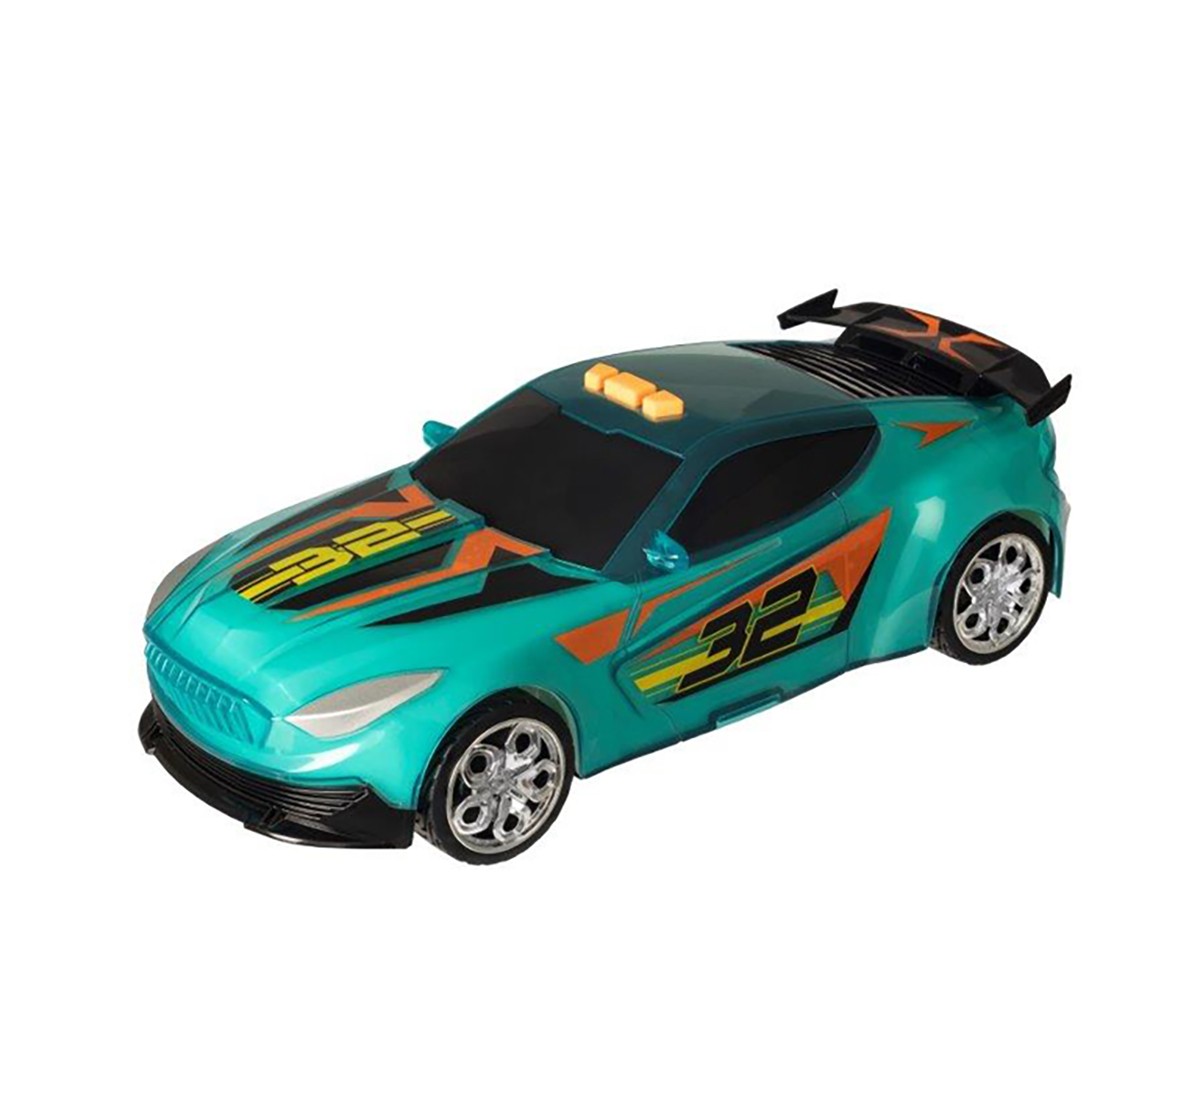 Teamsterz Light And Sound Street Starz Green Blue Car Vehicles for Kids age 3Y+ 